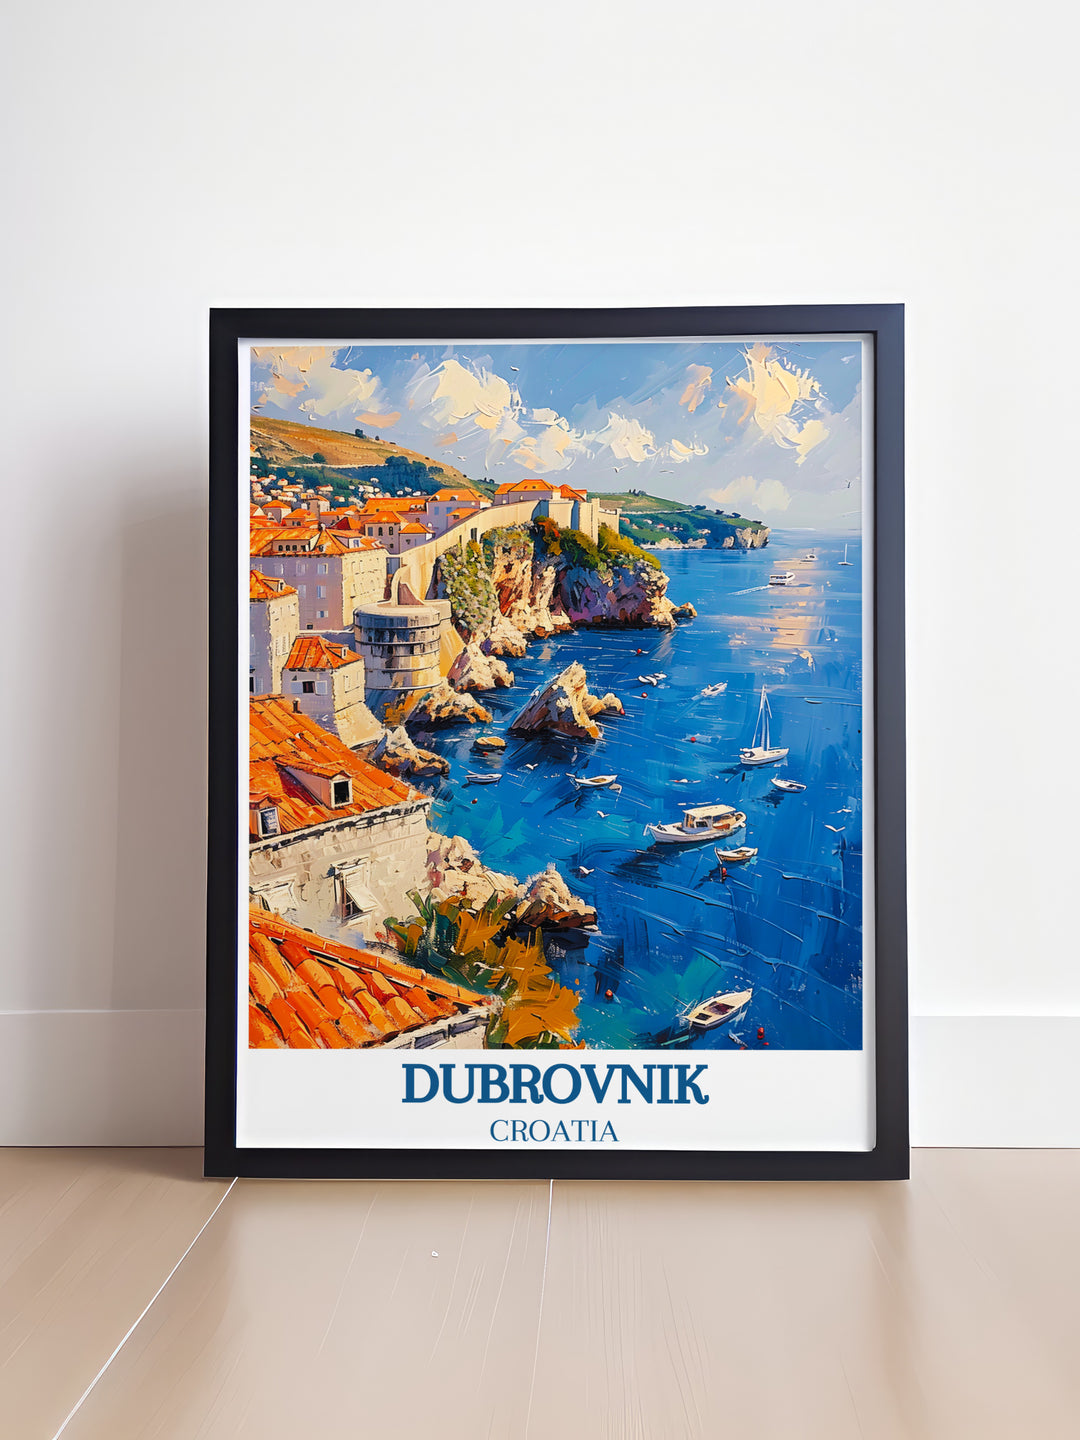 Dubrovnik Old Town Walls shine in Travel Prints, offering a glimpse into the city's rich history and architectural marvels